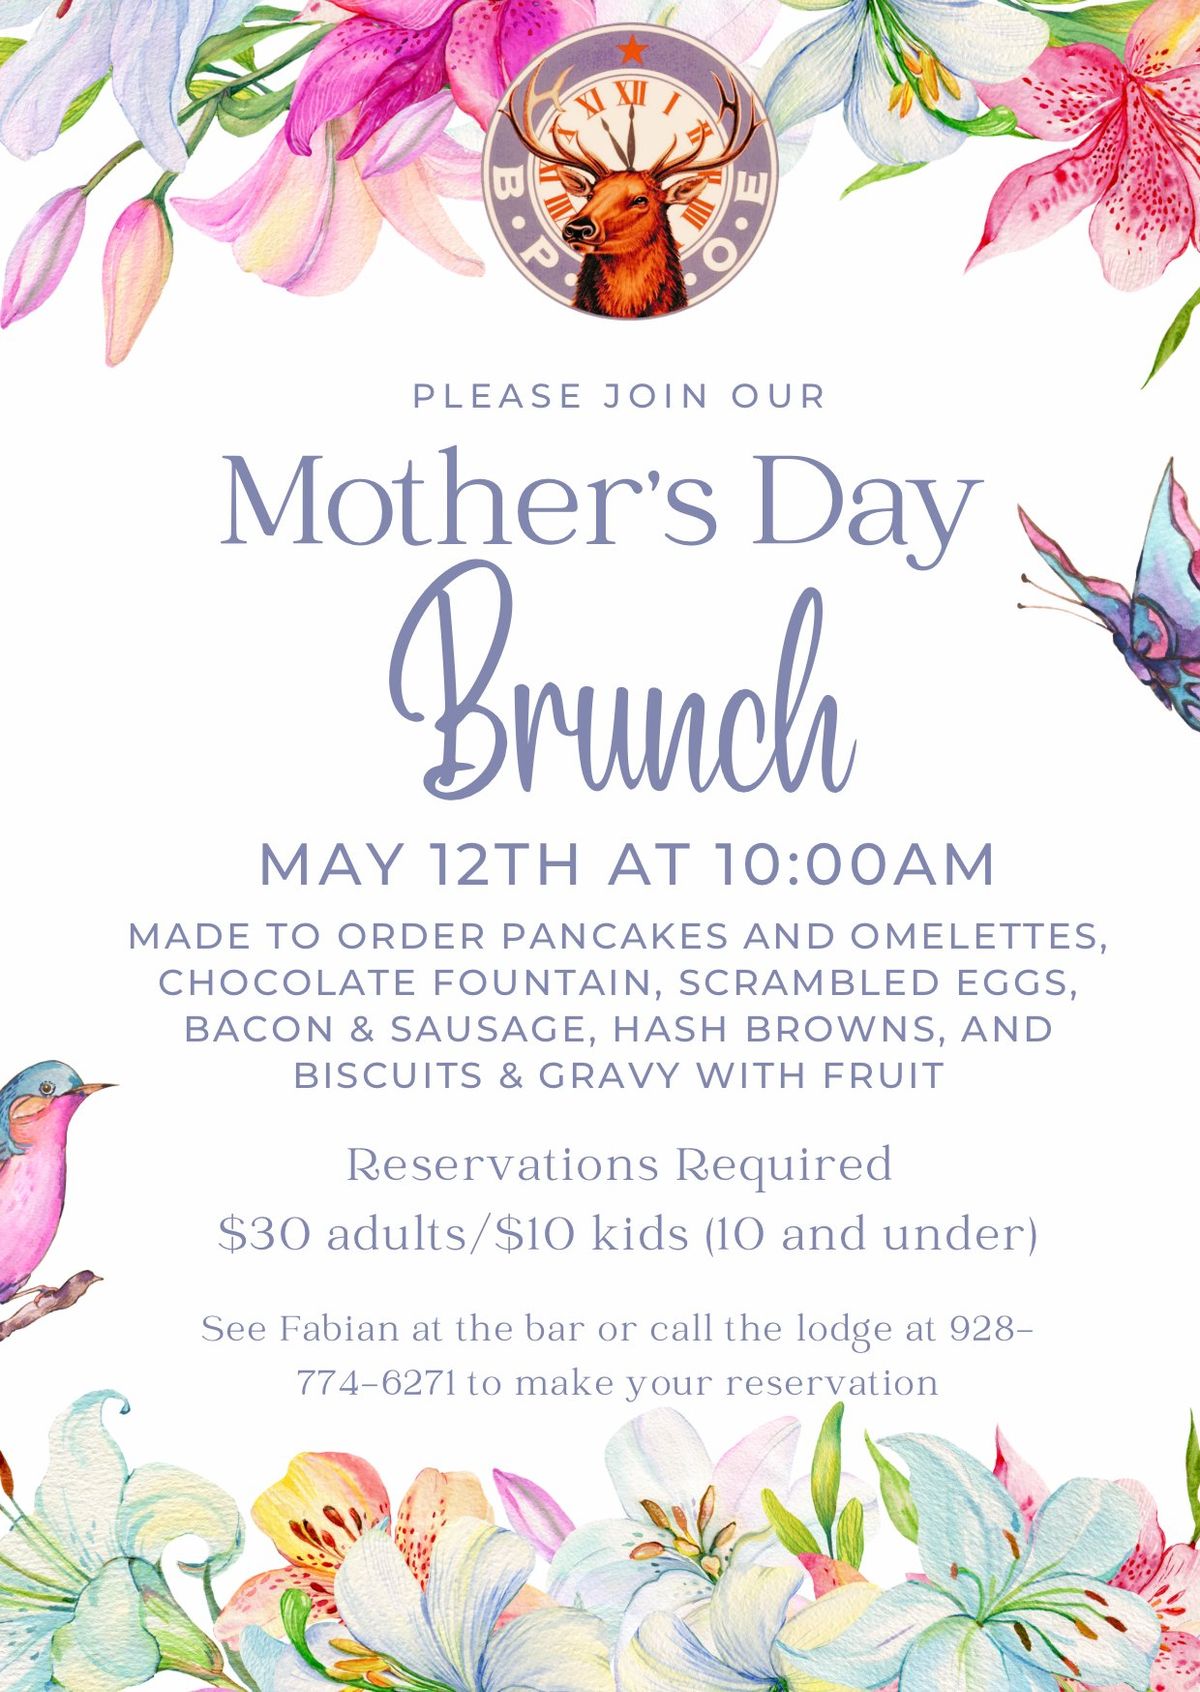 Mothers Day Brunch at the Elks Lodge (Reservations REQUIRED)